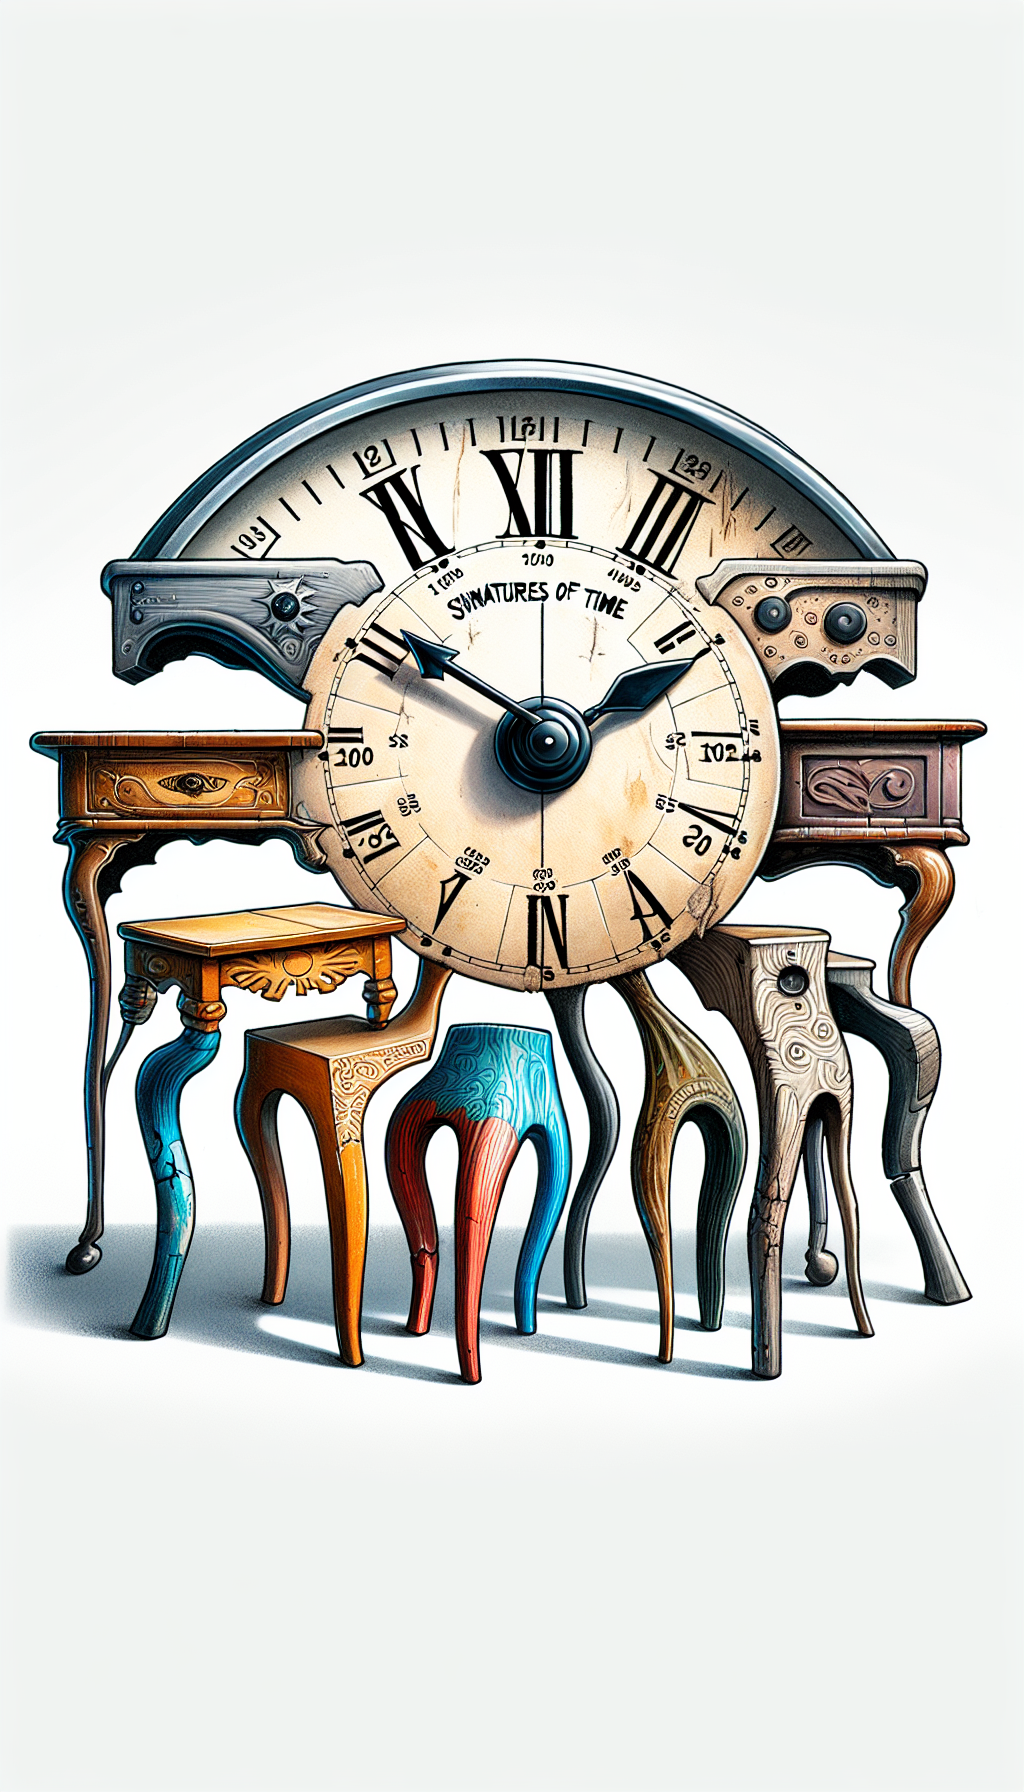 An illustration featuring a whimsical clock with table legs instead of clock hands, each leg from a different historical period, showcasing distinctive aging marks and design styles. The clock’s face is a magnifying glass, symbolizing the detective work in dating antiques, with noticeable age marks at each hour position, emphasizing the 'Signatures of Time'.